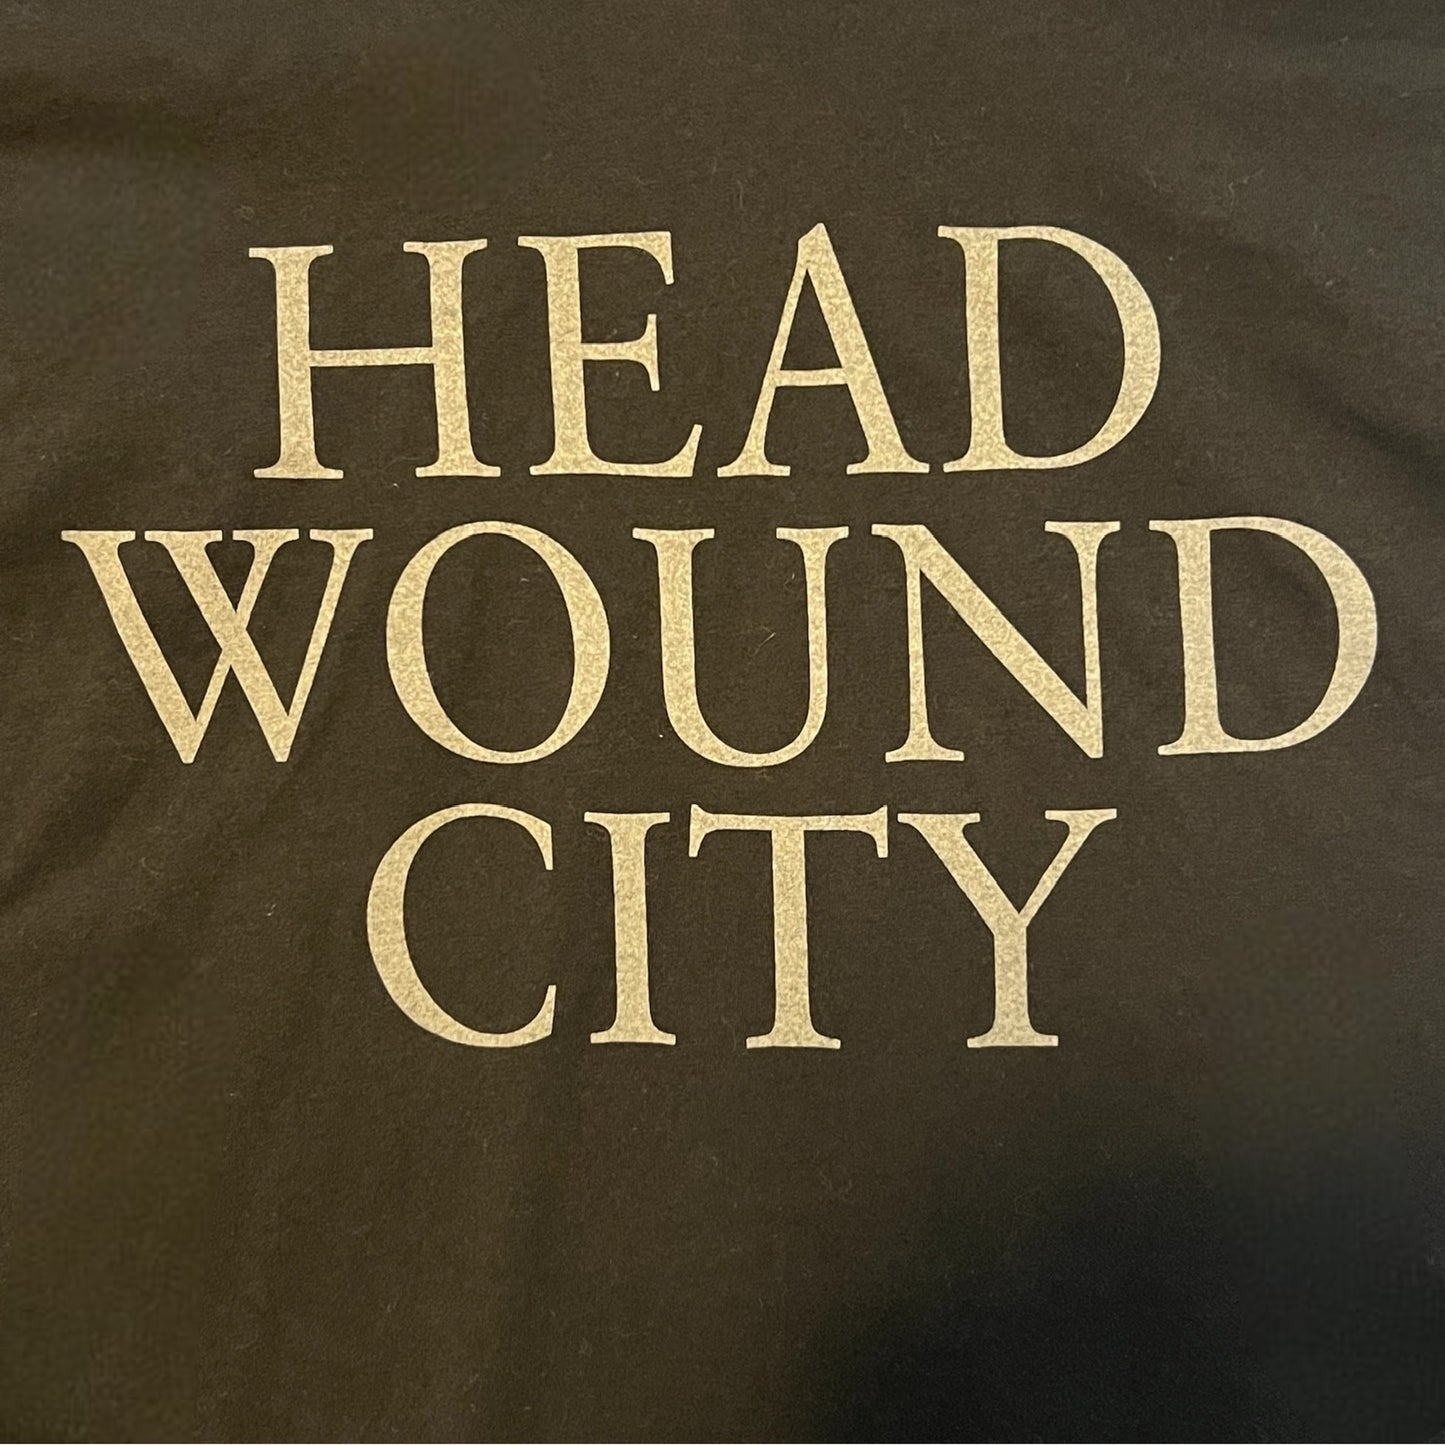 Head Wound City - A New Wave Of Violence T-Shirt Size L